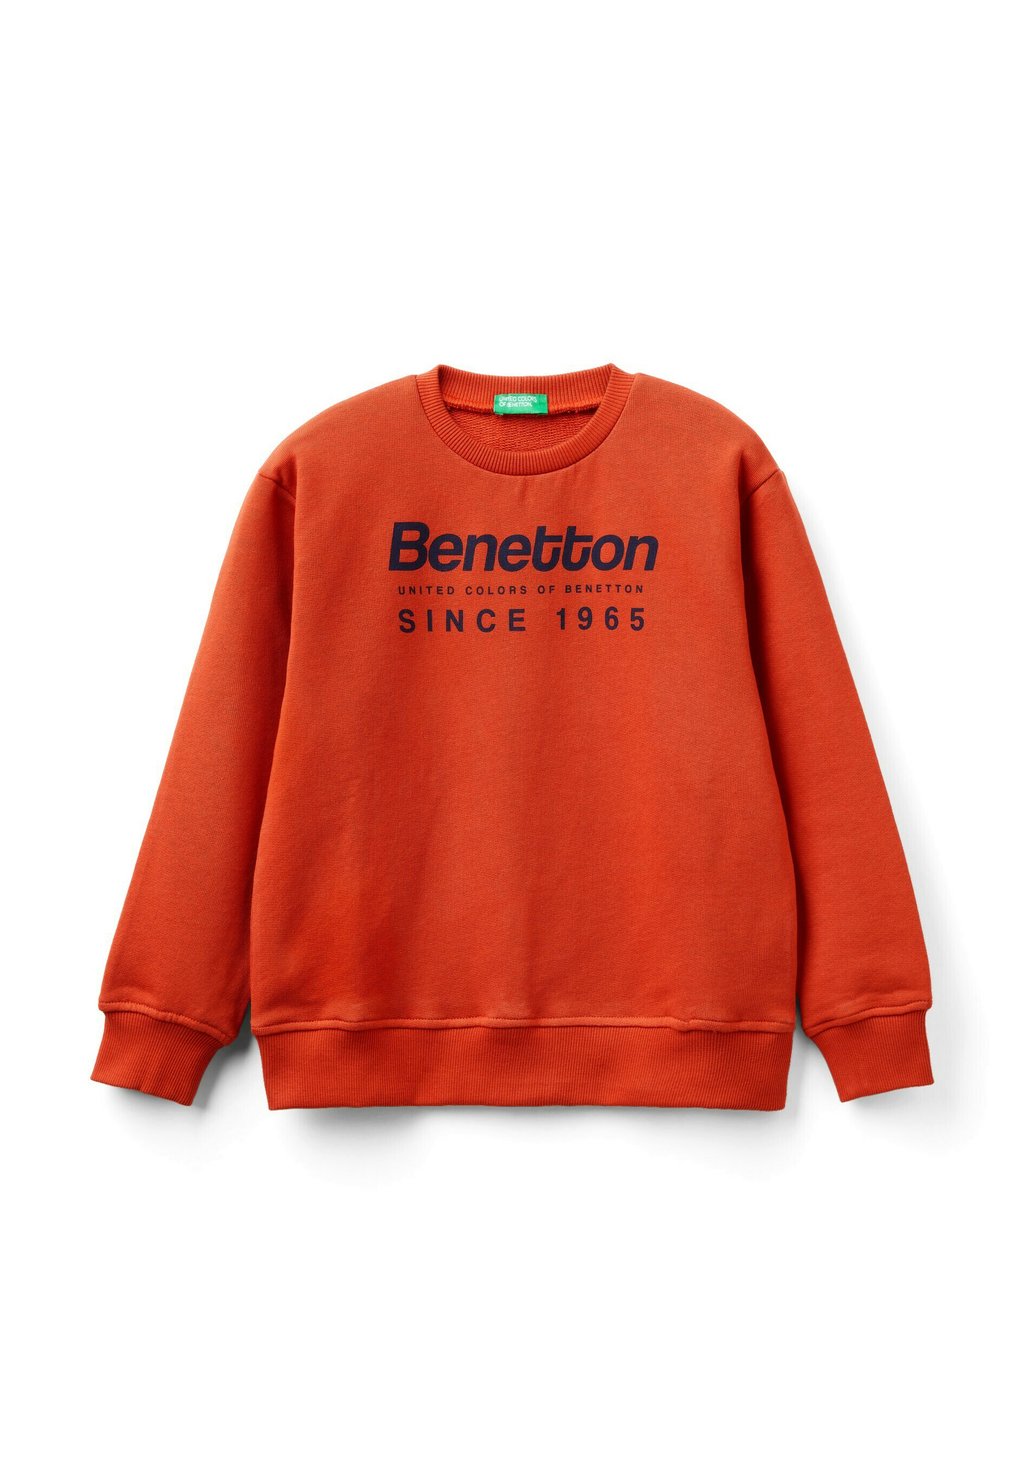 Толстовка WITH LOGO PRINT United Colors of Benetton, цвет Red толстовка with logo print united colors of benetton цвет red